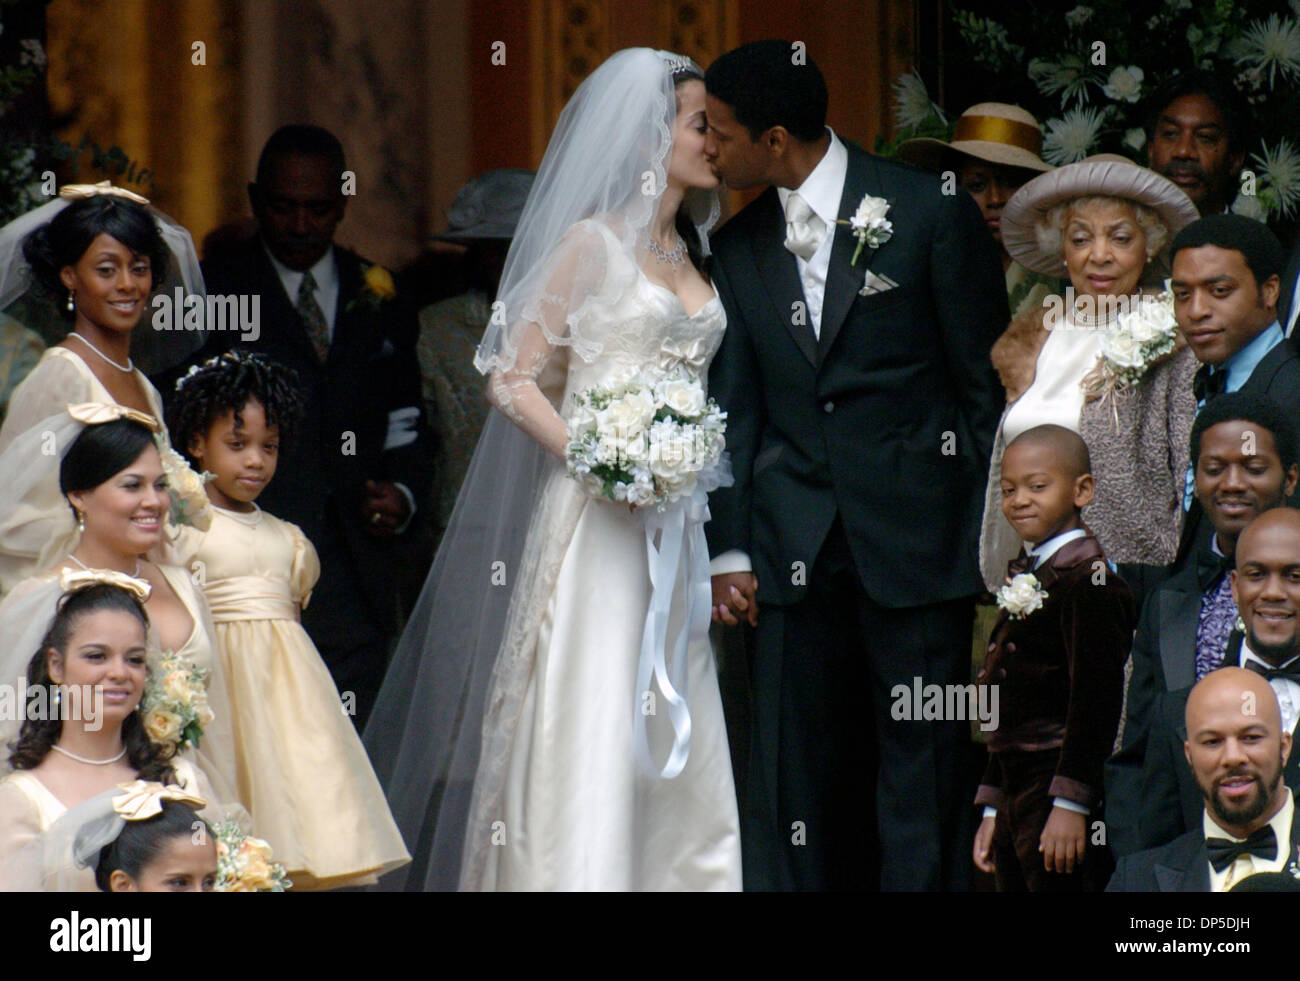 Sep 13, 2006; Manhattan, NY, USA; Actors DENZEL WASHINGTON and LYMARI NADAL film a wedding scene on the steps of Mt. OIivet Baptist Church in Harlem from the upcoming film 'American Gangster,' based on the true story of a Harlem drug dealer. Denzel Washington plays Frank Lucas, a.k.a 'Superfly' who smuggled heroin out of Southeast Asia in the caskets of soldiers killed in Vietnam.  Stock Photo